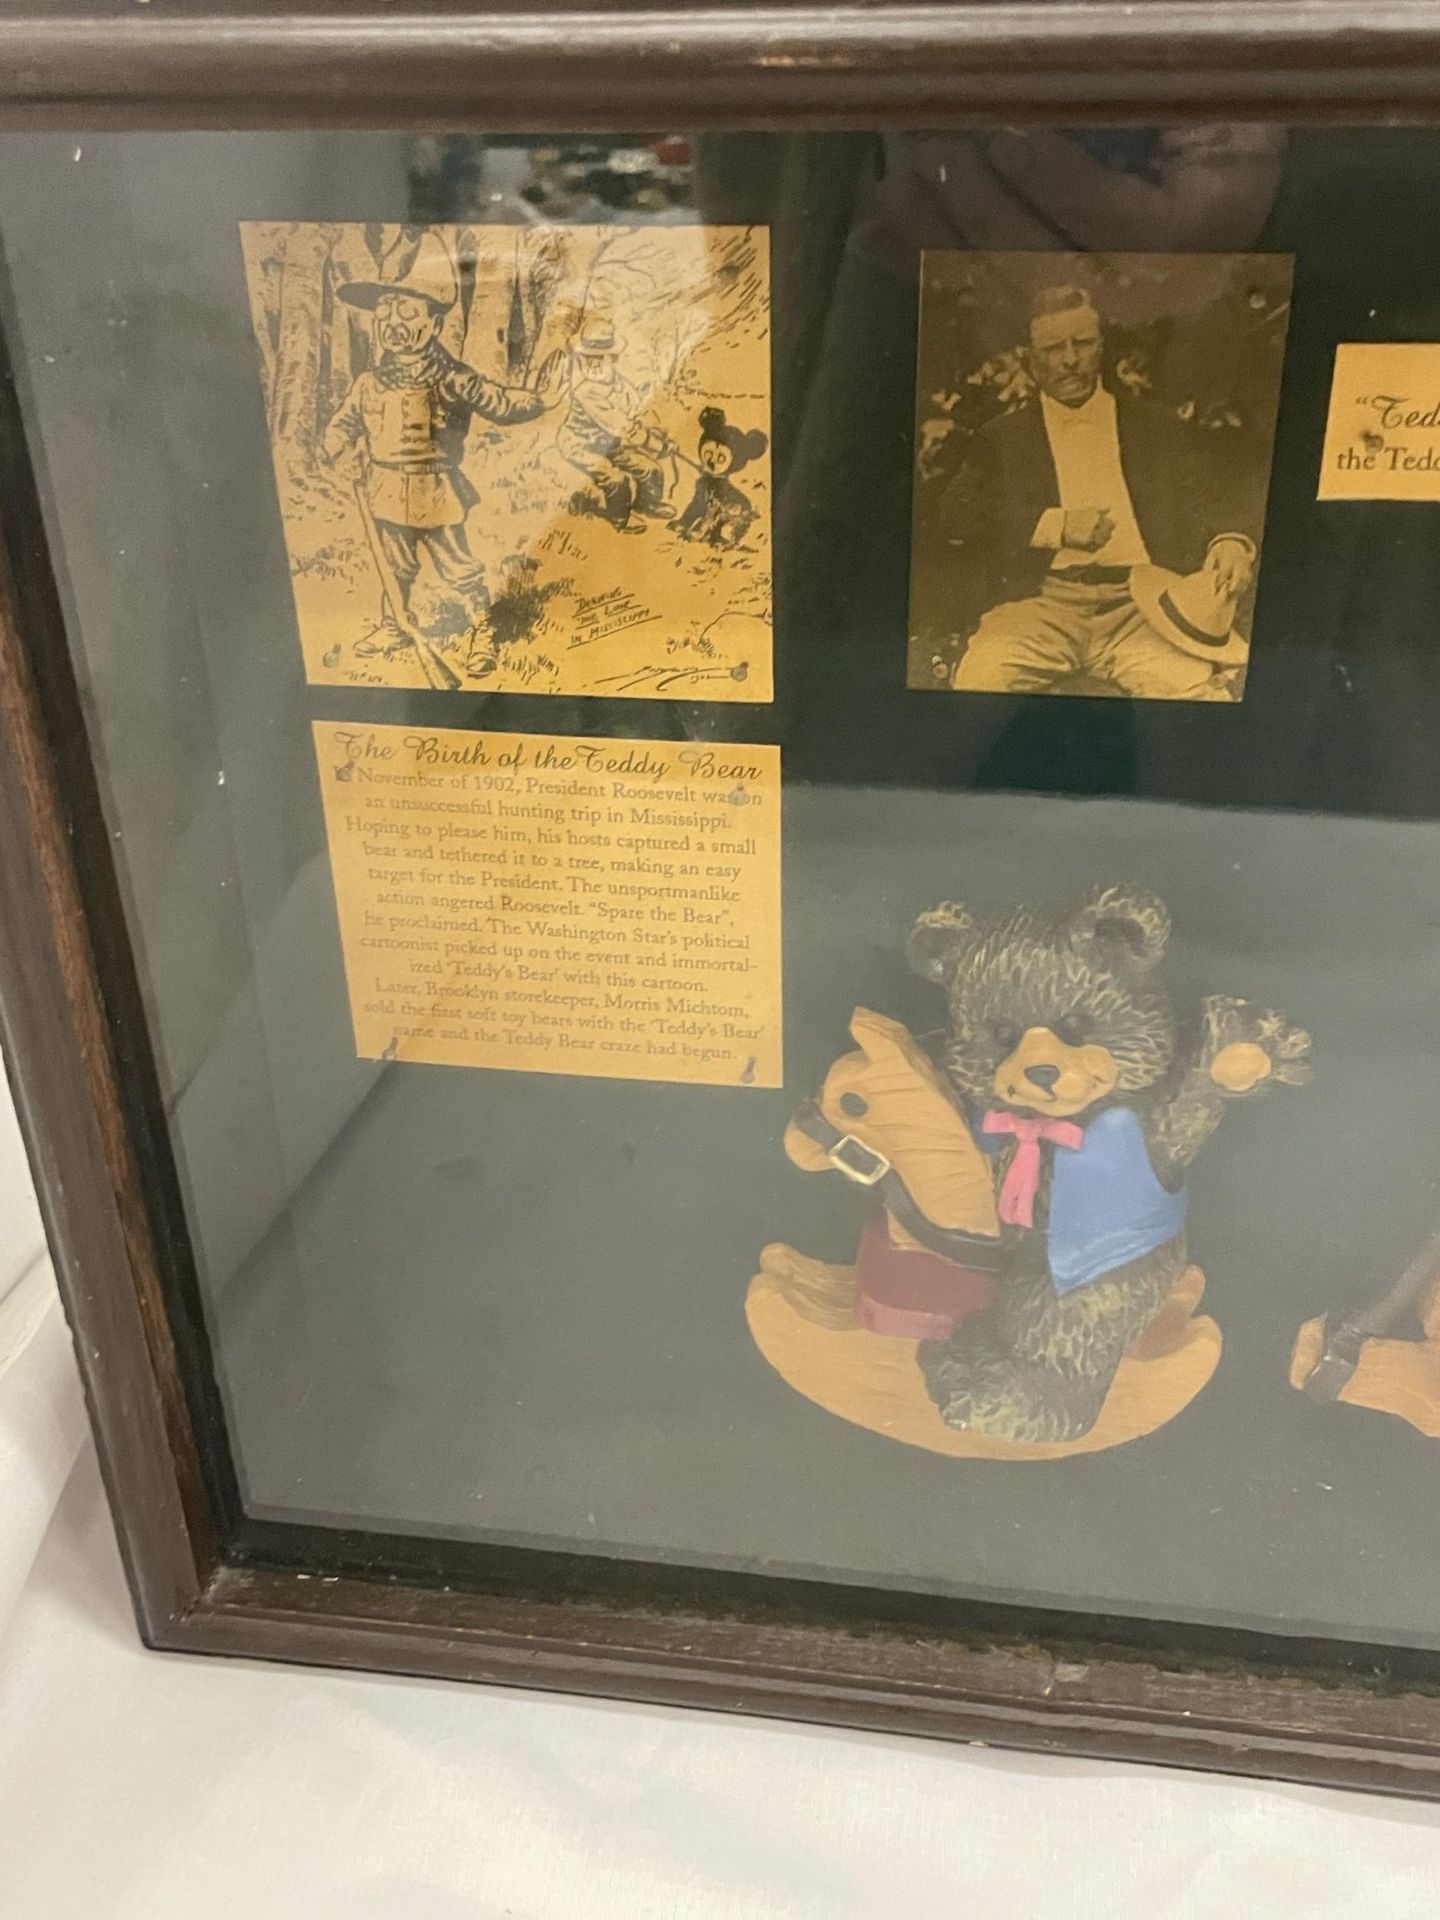 A GLASS FRONTED WOODEN CASED DISPLAY BOX WITH TEDDIES AND THEIR STORIES - A HISTORY OF THE STEIFF - Image 2 of 4